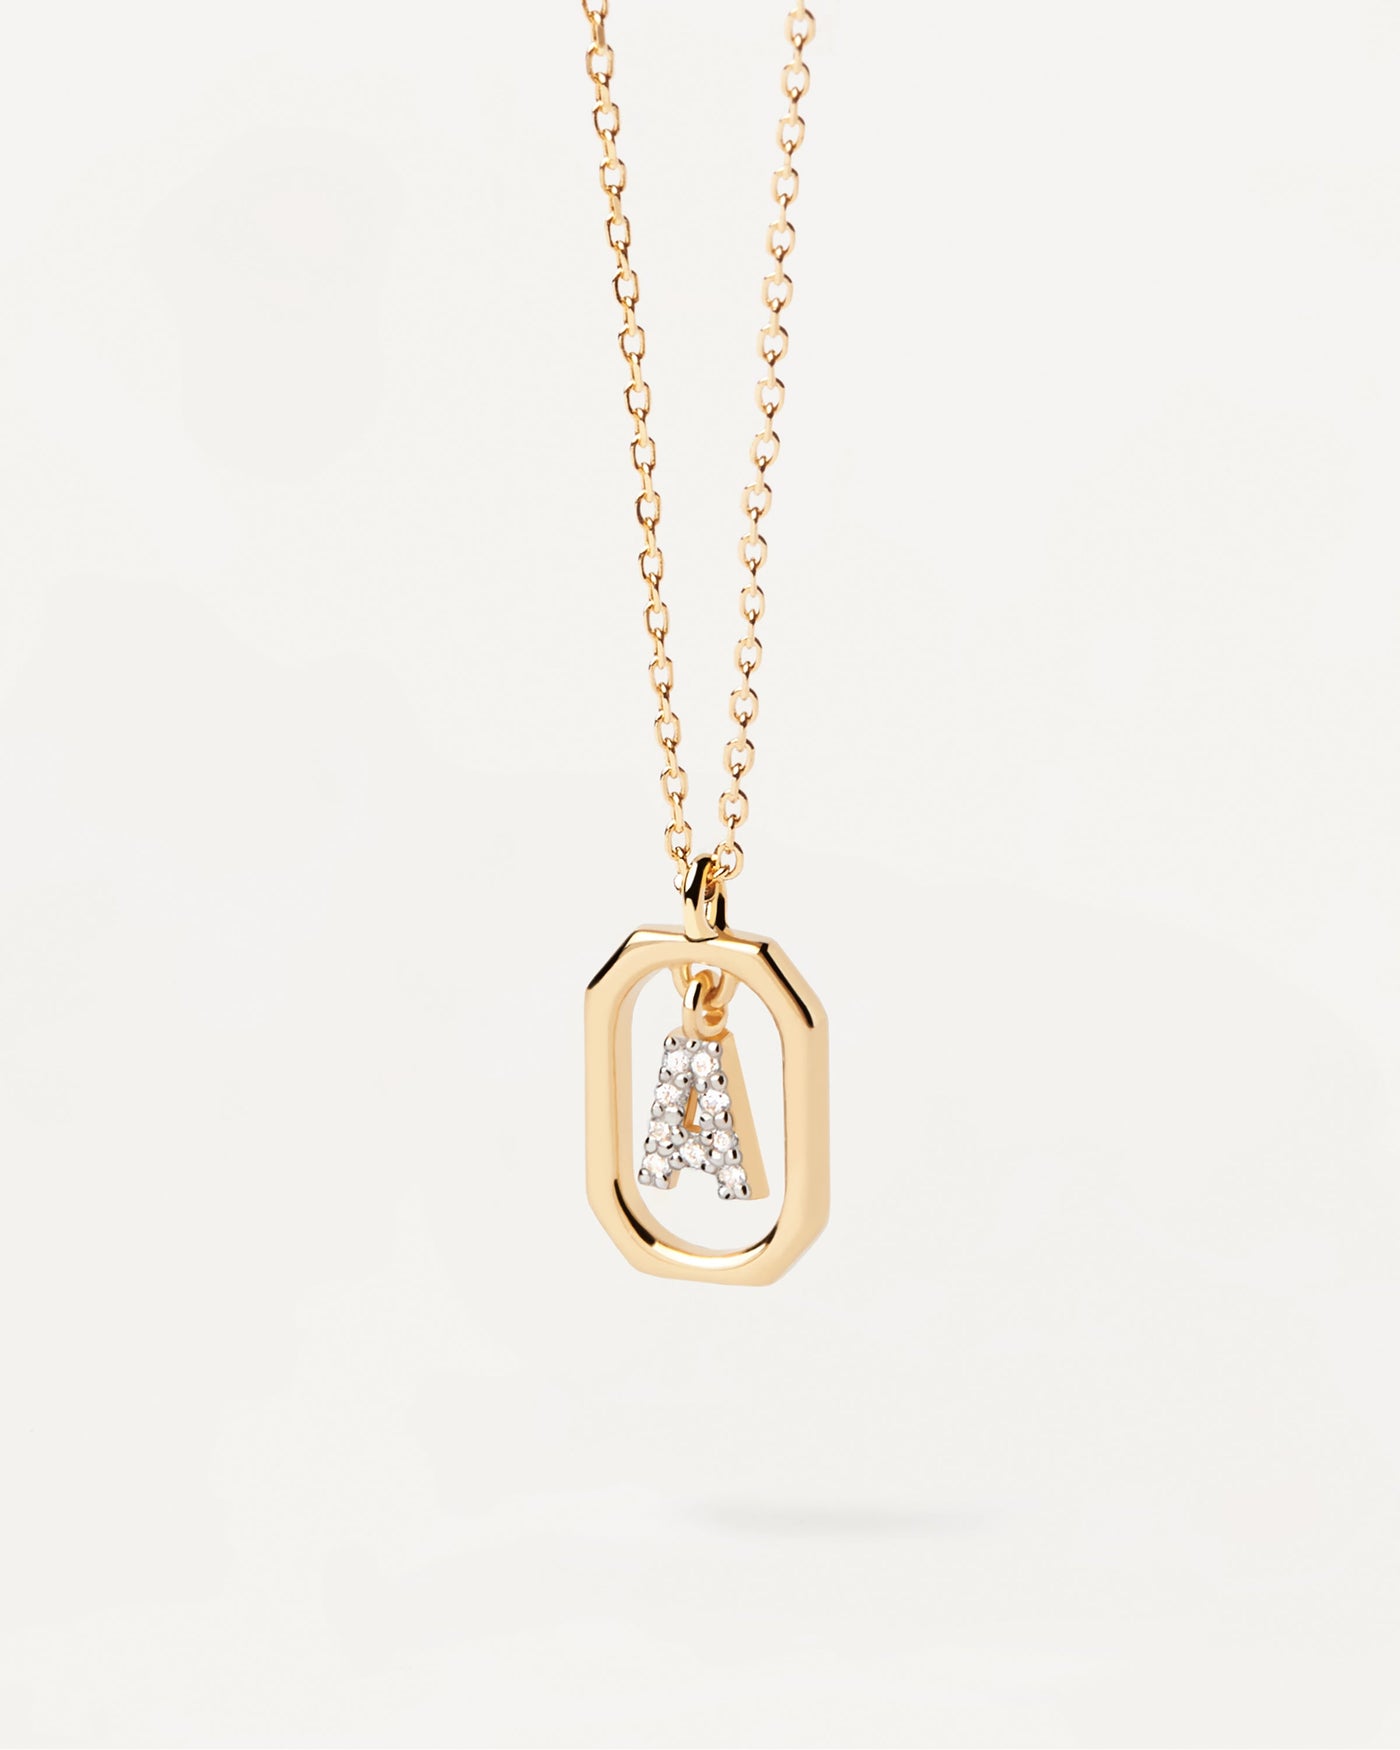 2023 Selection | Mini Letter A Necklace. Small initial A necklace in zirconia inside gold-plated silver octagonal pendant. Get the latest arrival from PDPAOLA. Place your order safely and get this Best Seller. Free Shipping.